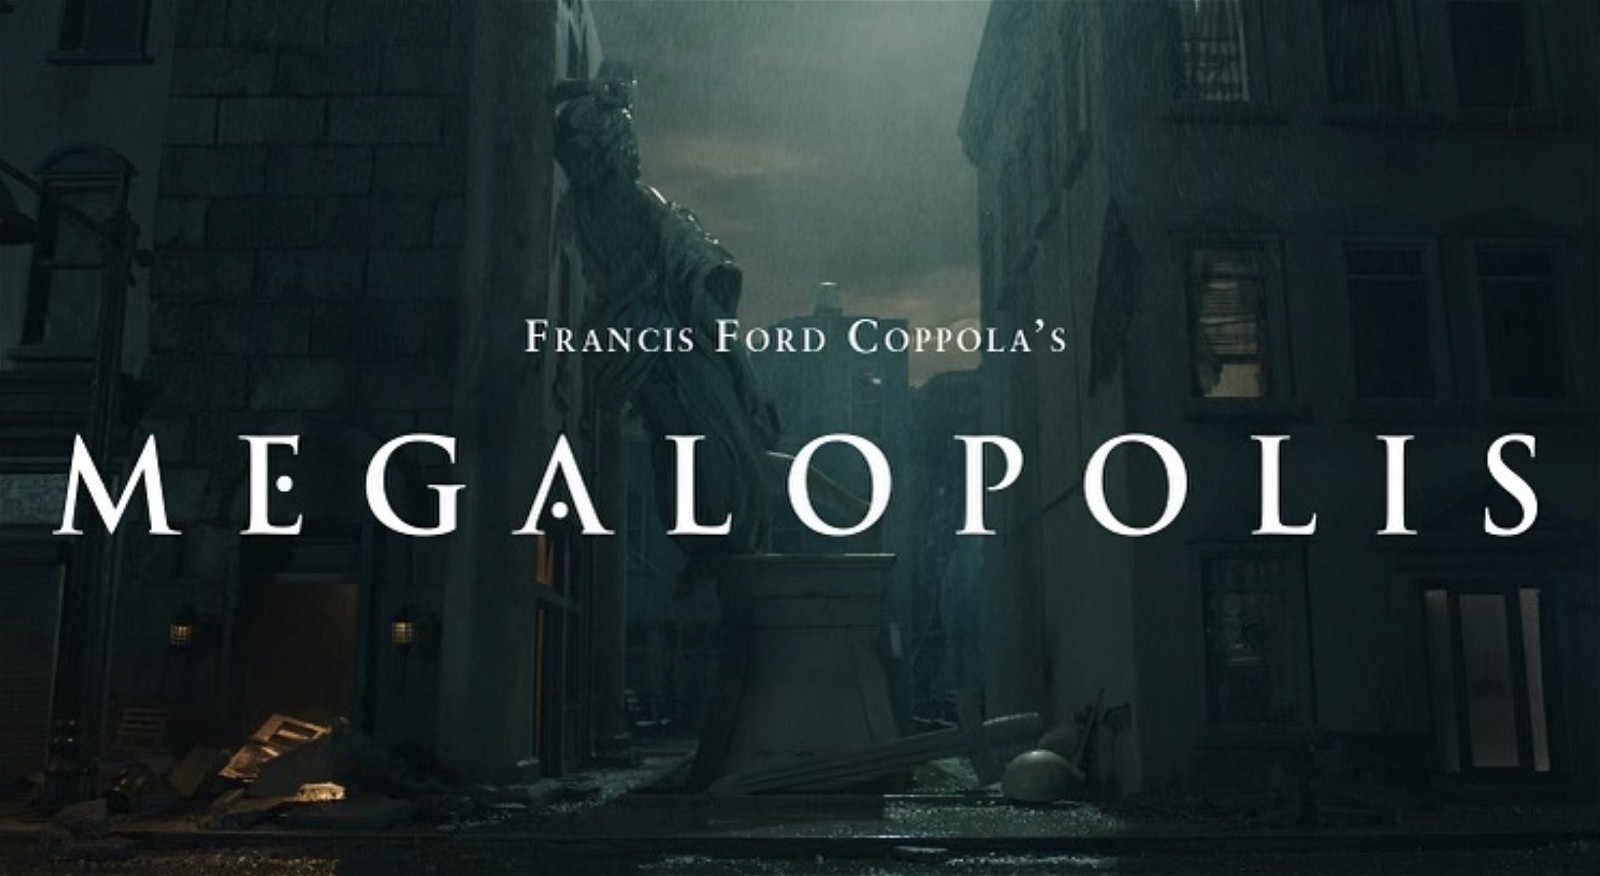 The first look of Francis Ford Coppola's Megalopolis